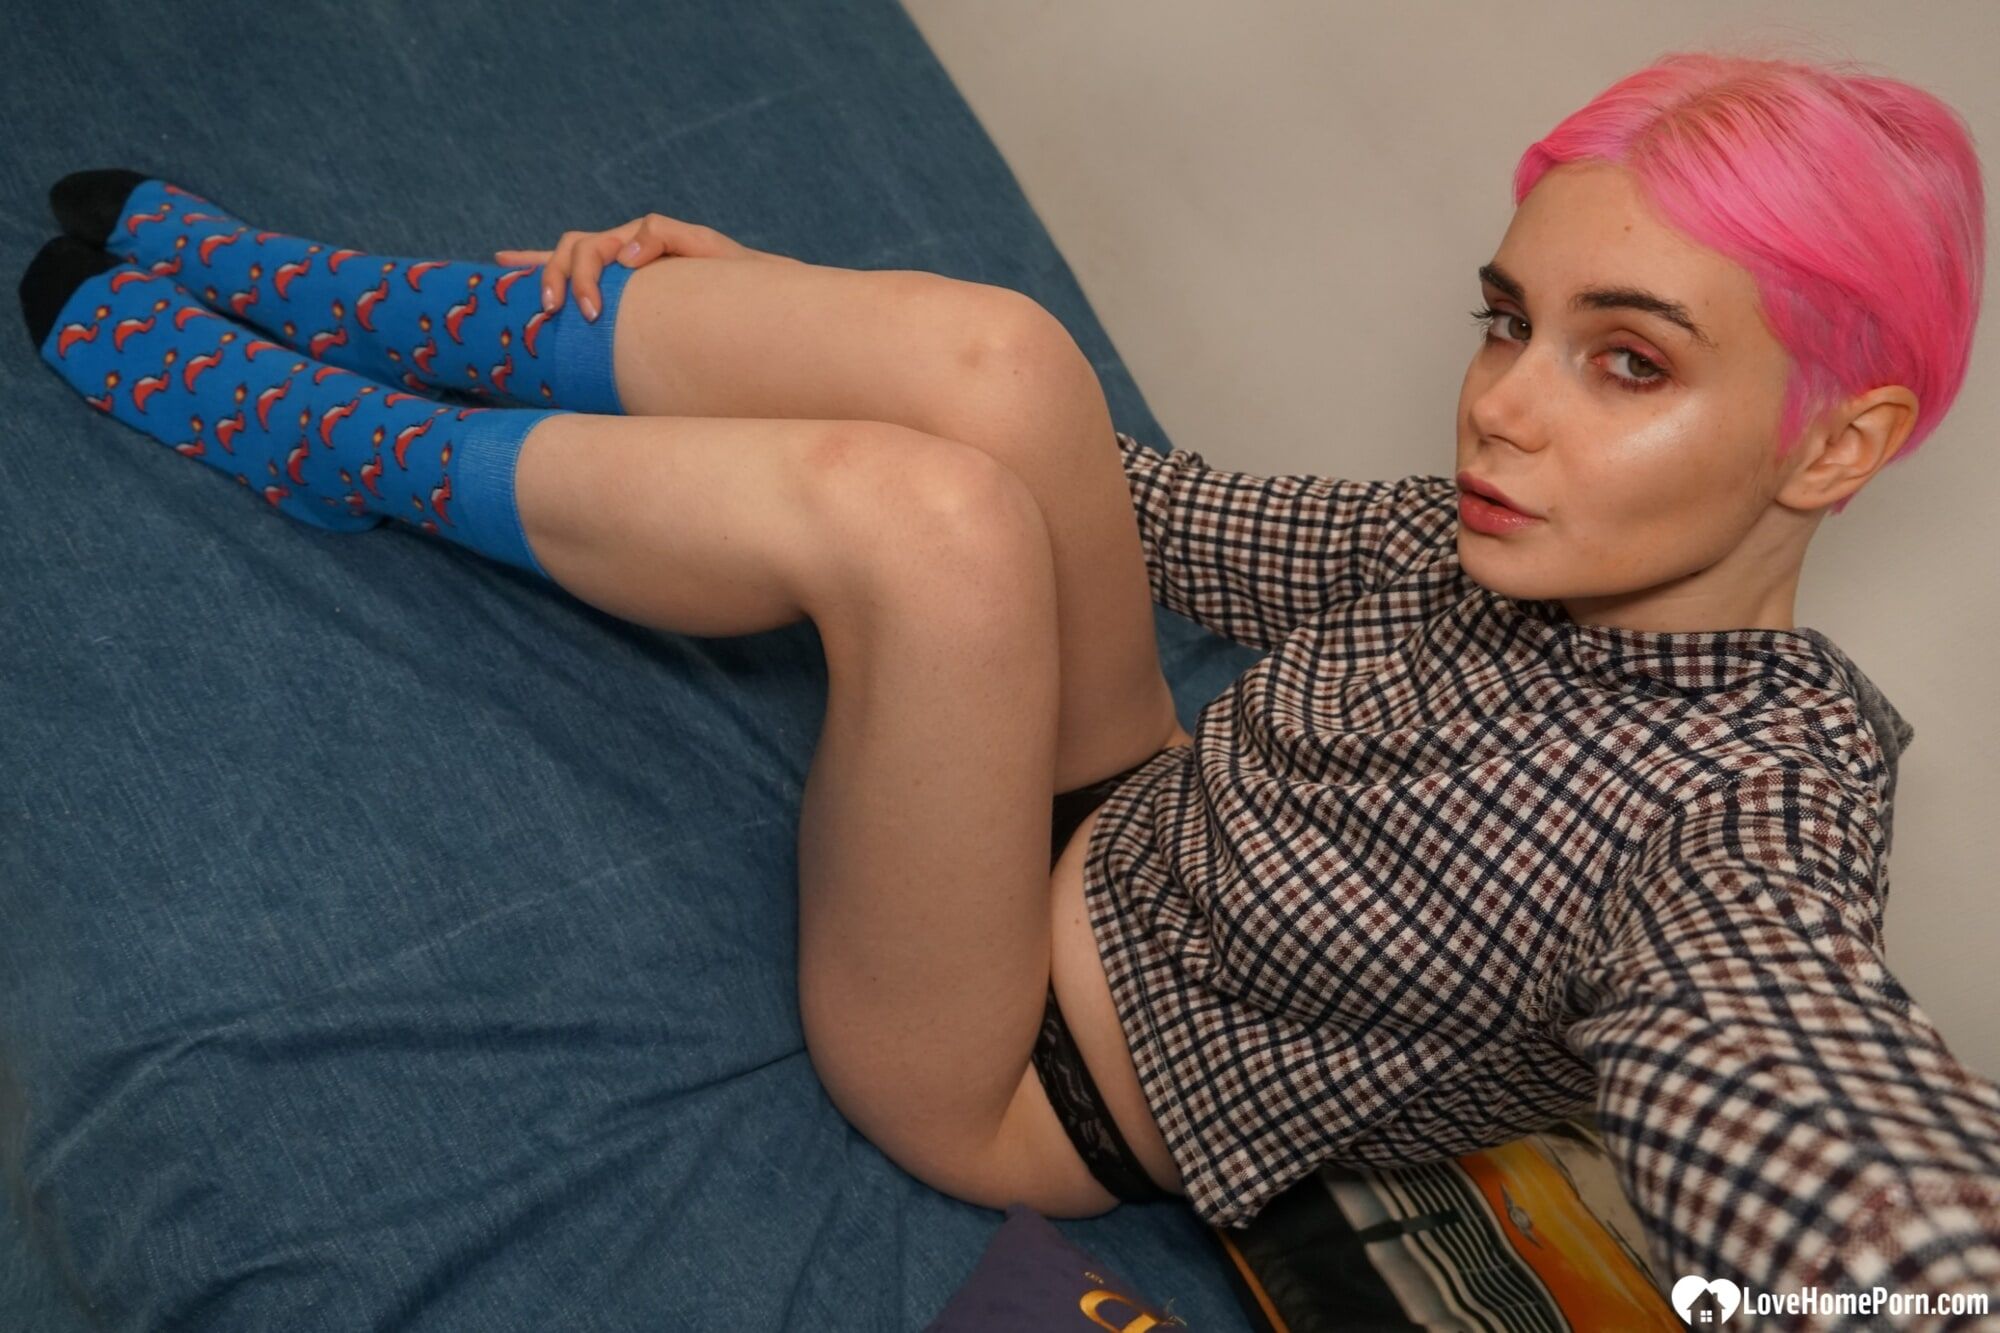 Pink-haired pixie cut and hot POV nudes